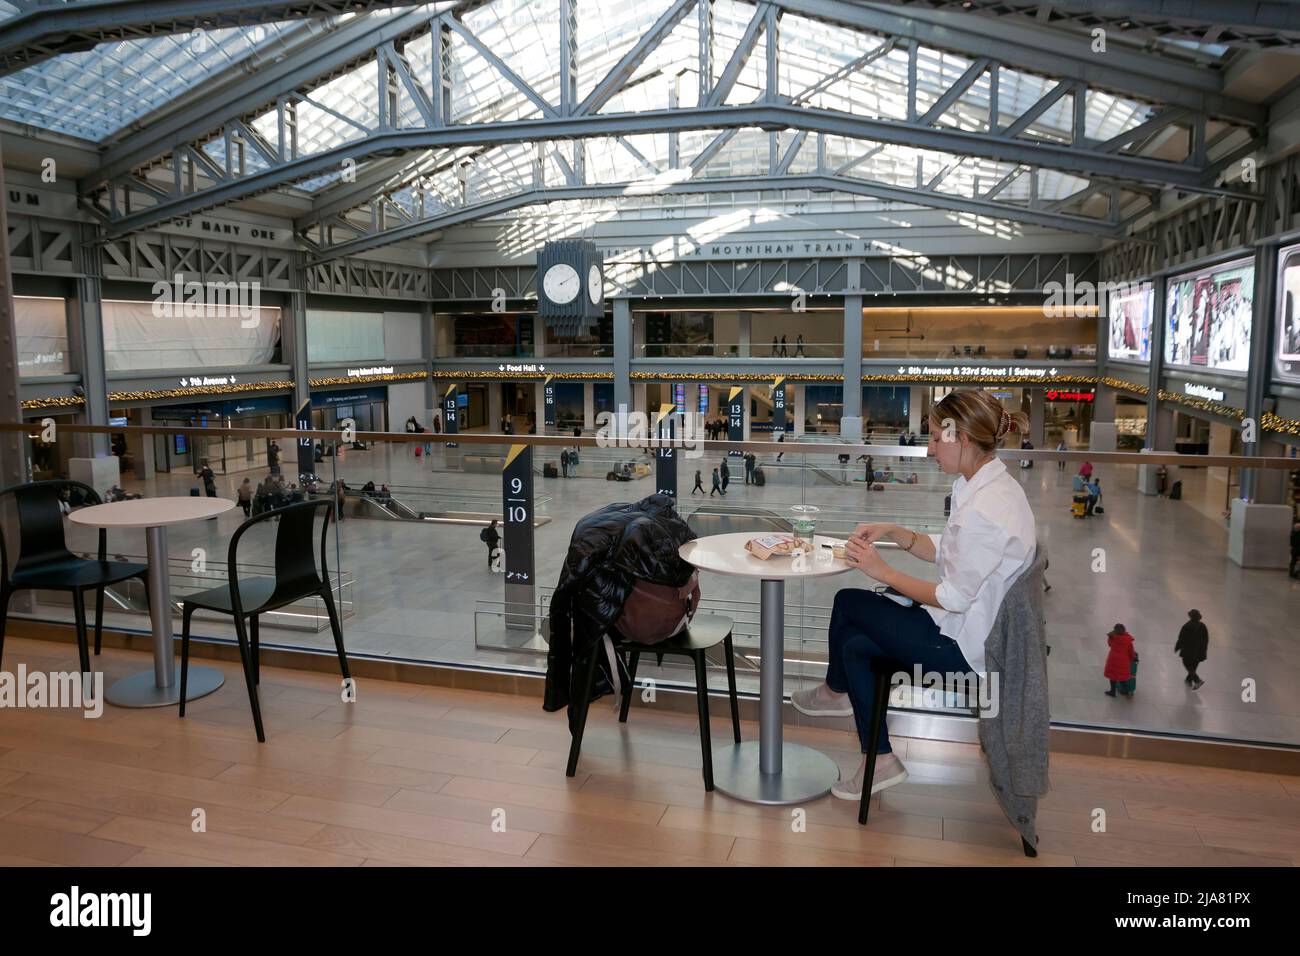 Amtrak's Metropolitan Lounge Balcony overlooking the new Moynihan Train Hall in the James A. Farley Post Office Building, New York City, NY. Stock Photo